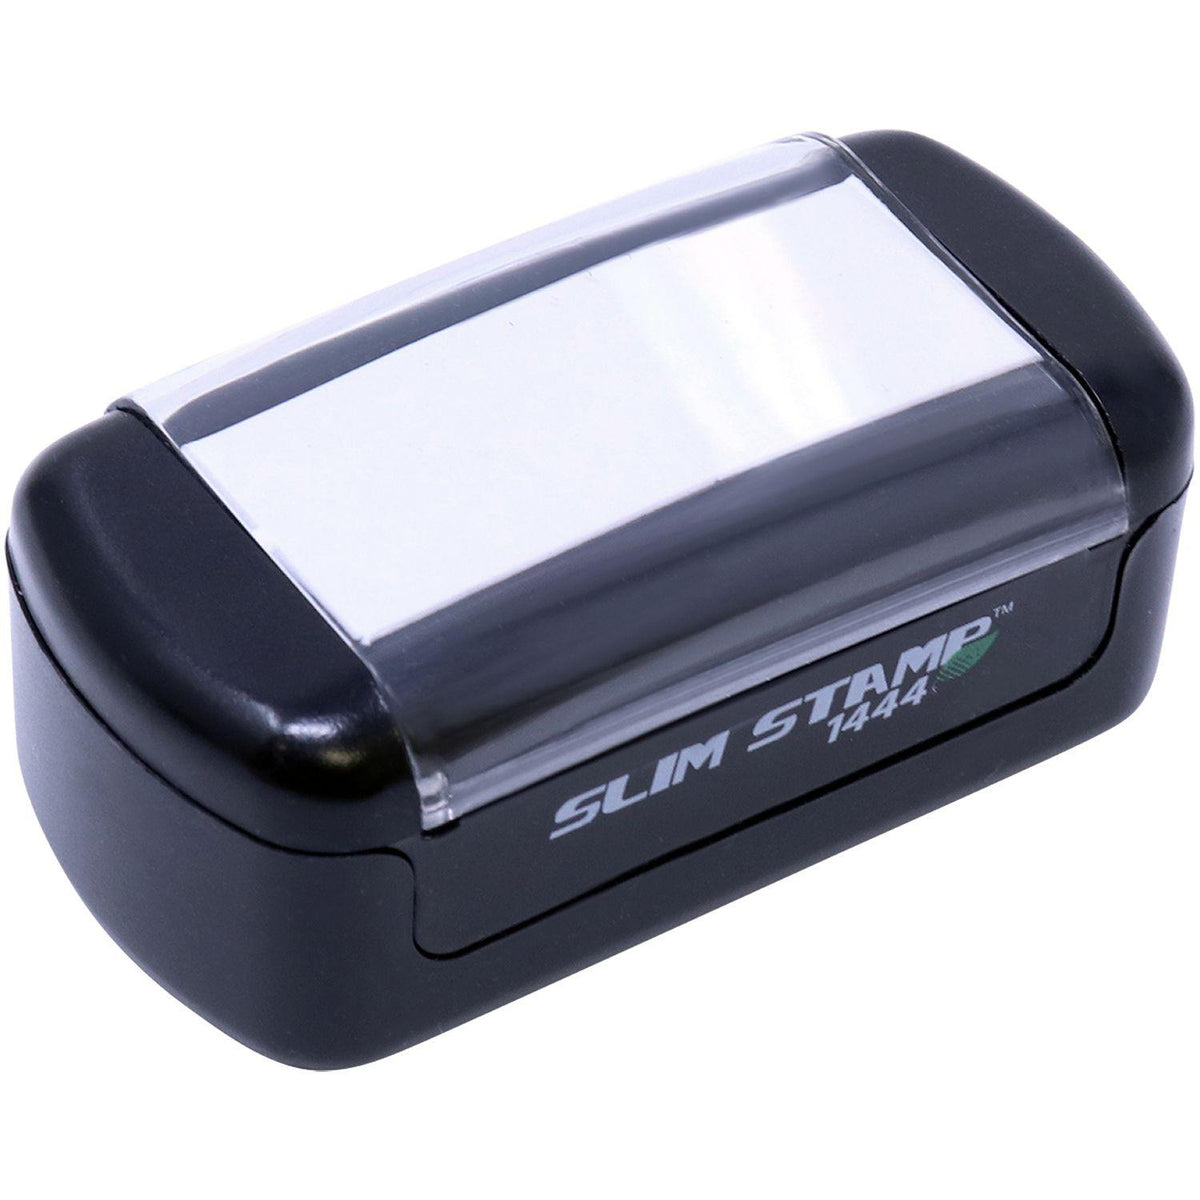 Slim Pre-Inked Bold Covid-19 Stamp - Engineer Seal Stamps - Brand_Slim, Impression Size_Small, Stamp Type_Pre-Inked Stamp, Type of Use_Medical Office